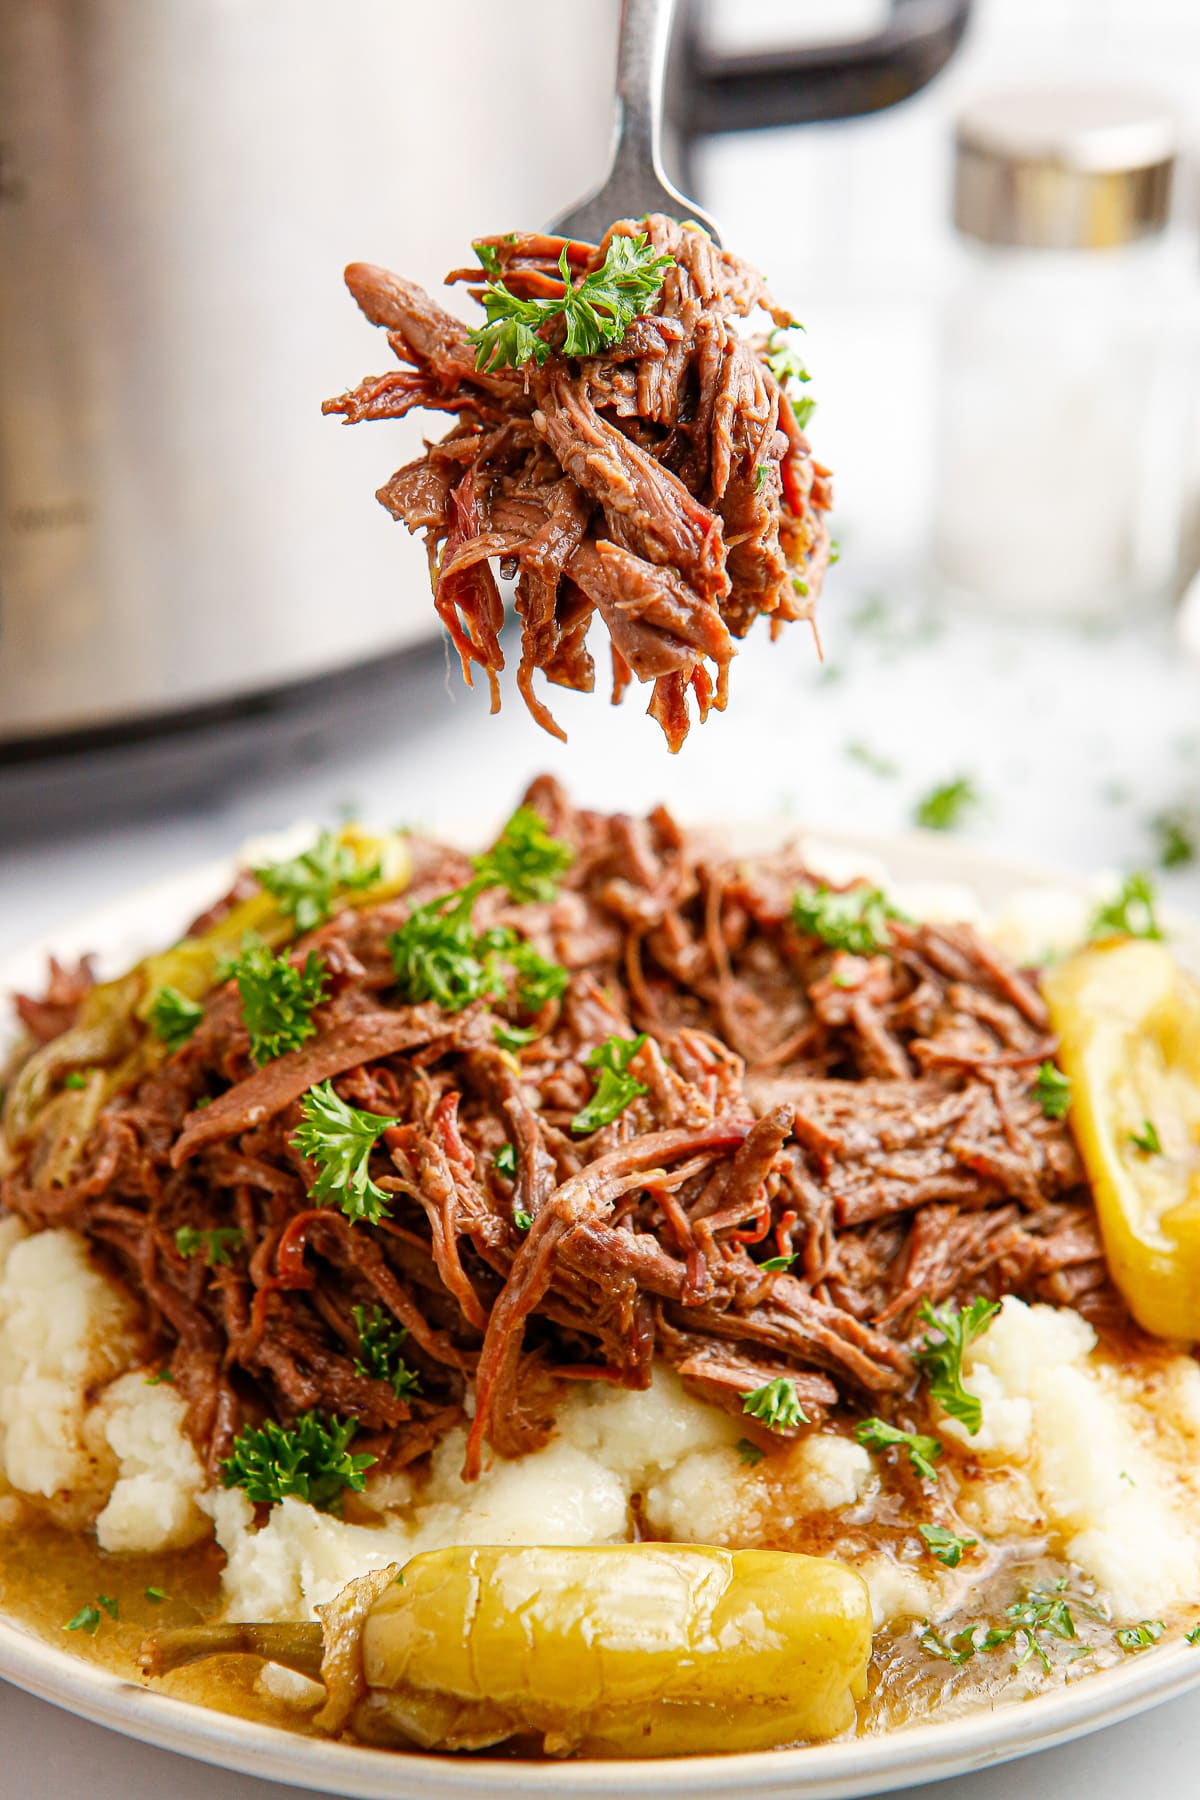 A bite of slow cooker Mississippi pot roast being lifted from a plate of shredded beef on top of mashed potatoes by a fork.